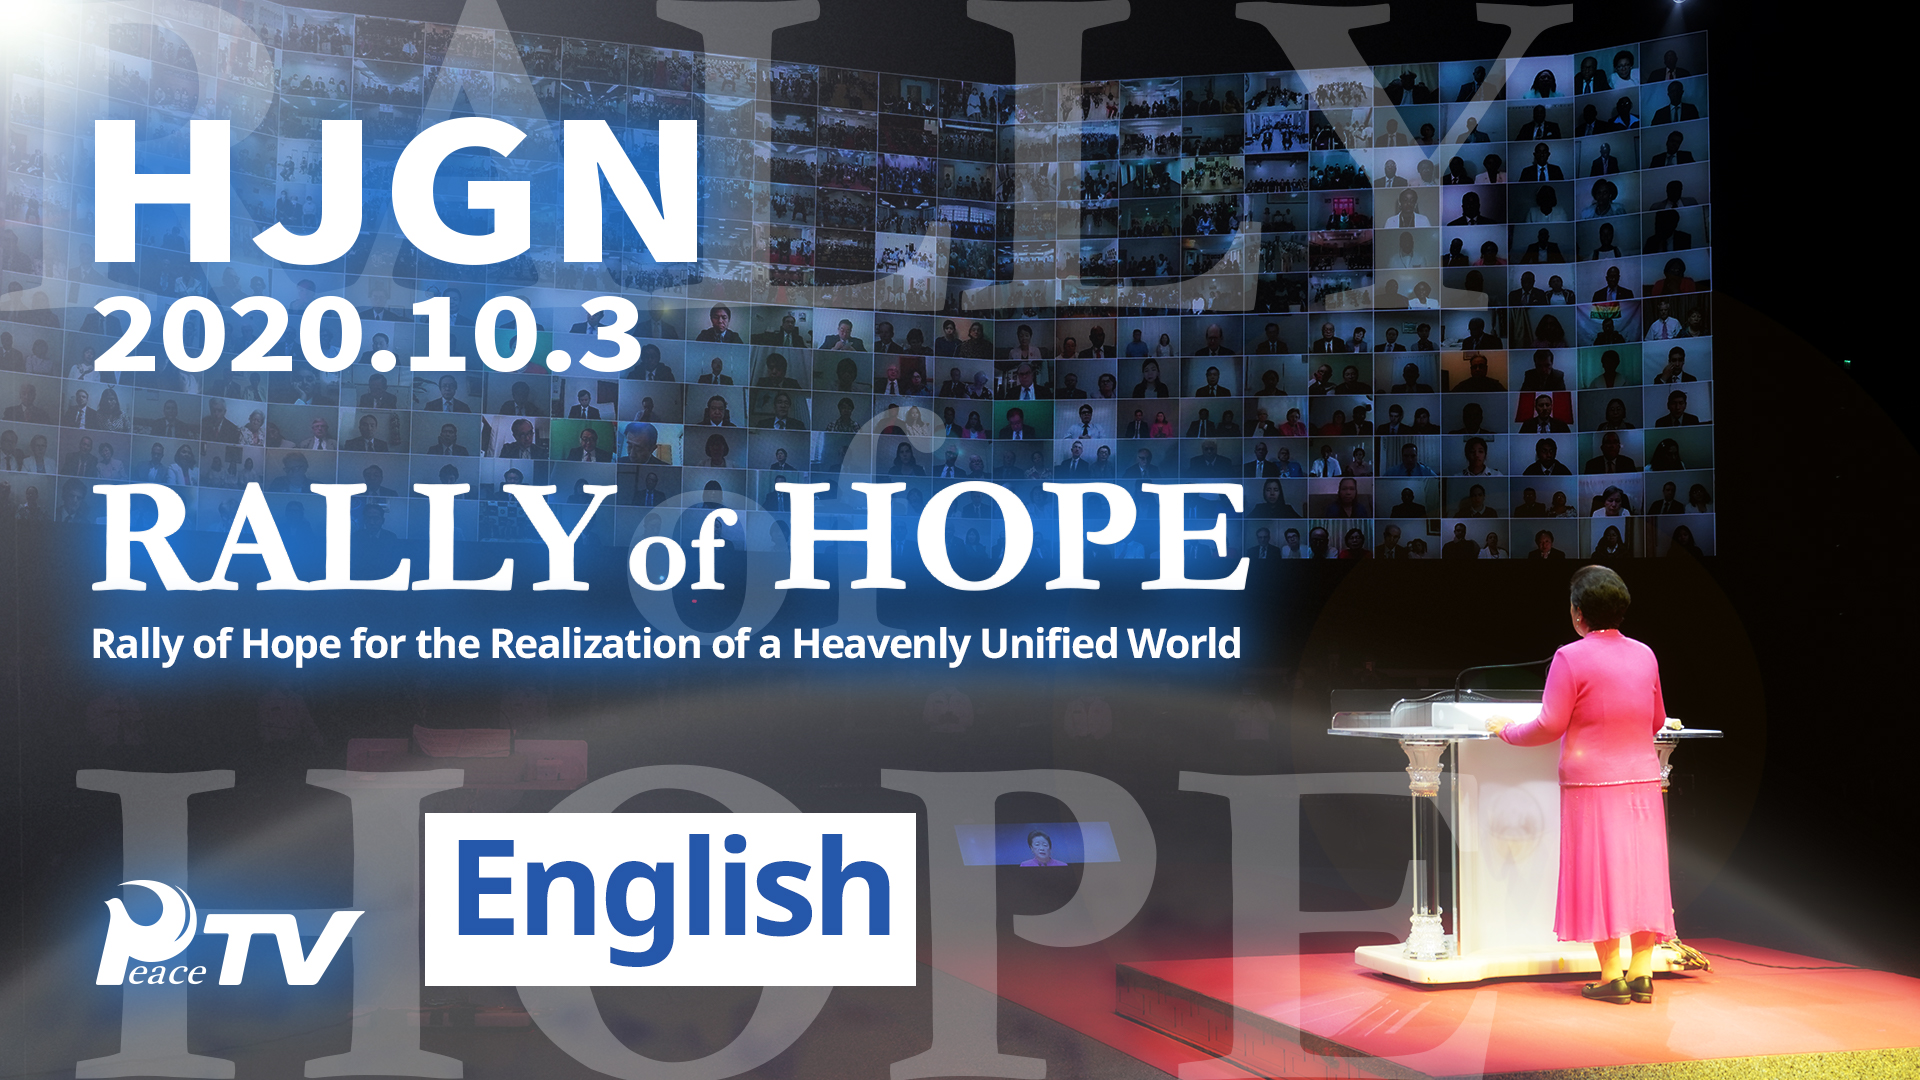 The 2nd One Million Rally of Hope for the Realization of a Heavenly Unified World